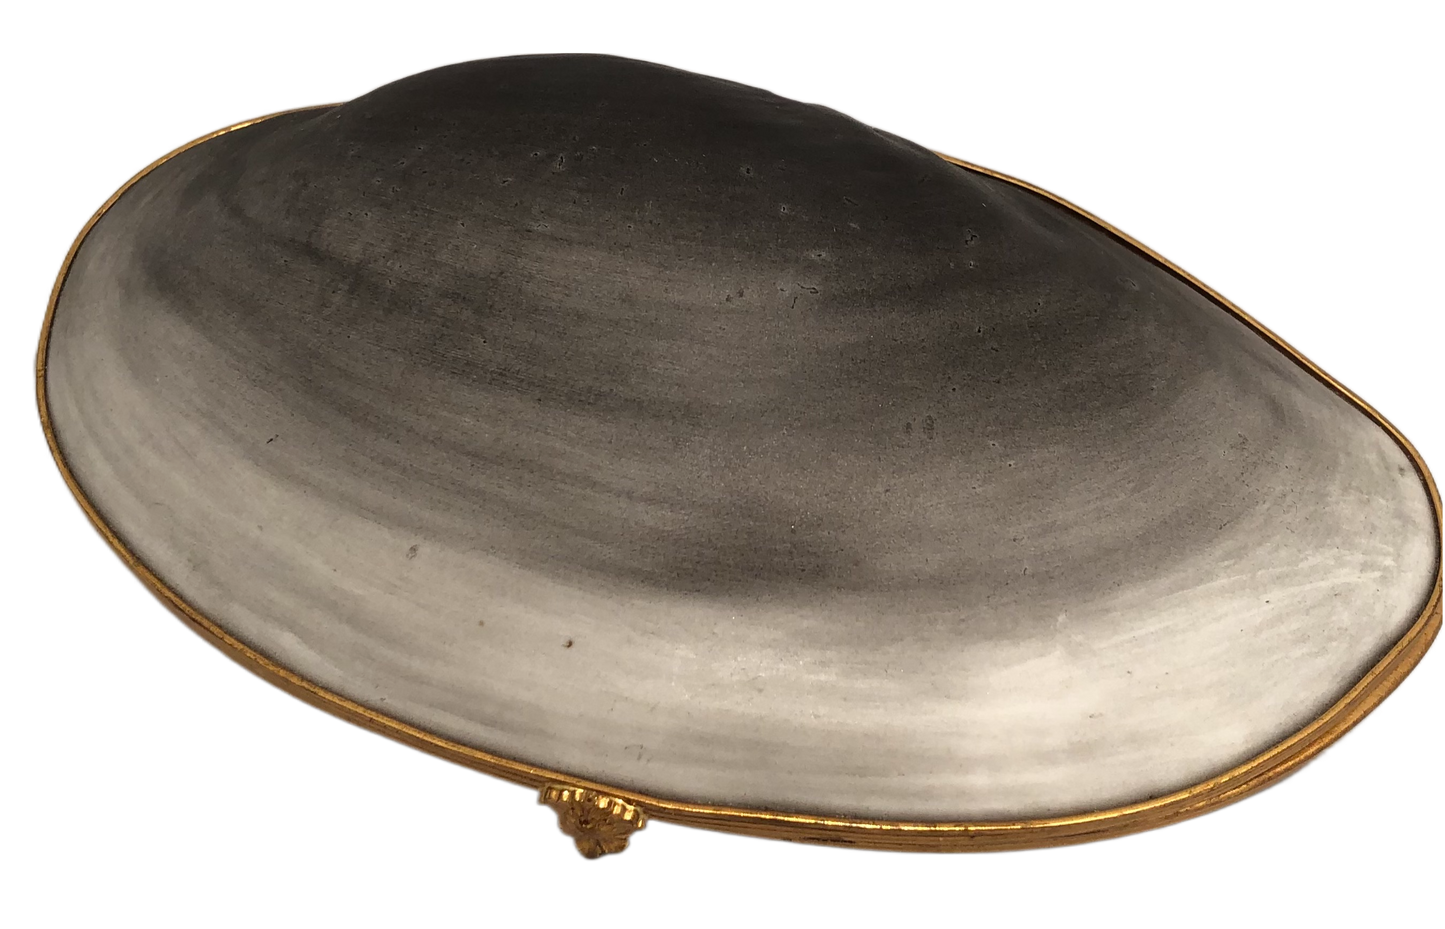 Ocean's Beauty: Hand-Painted Limoges Box - Black to Grey Gradient Clam Shell